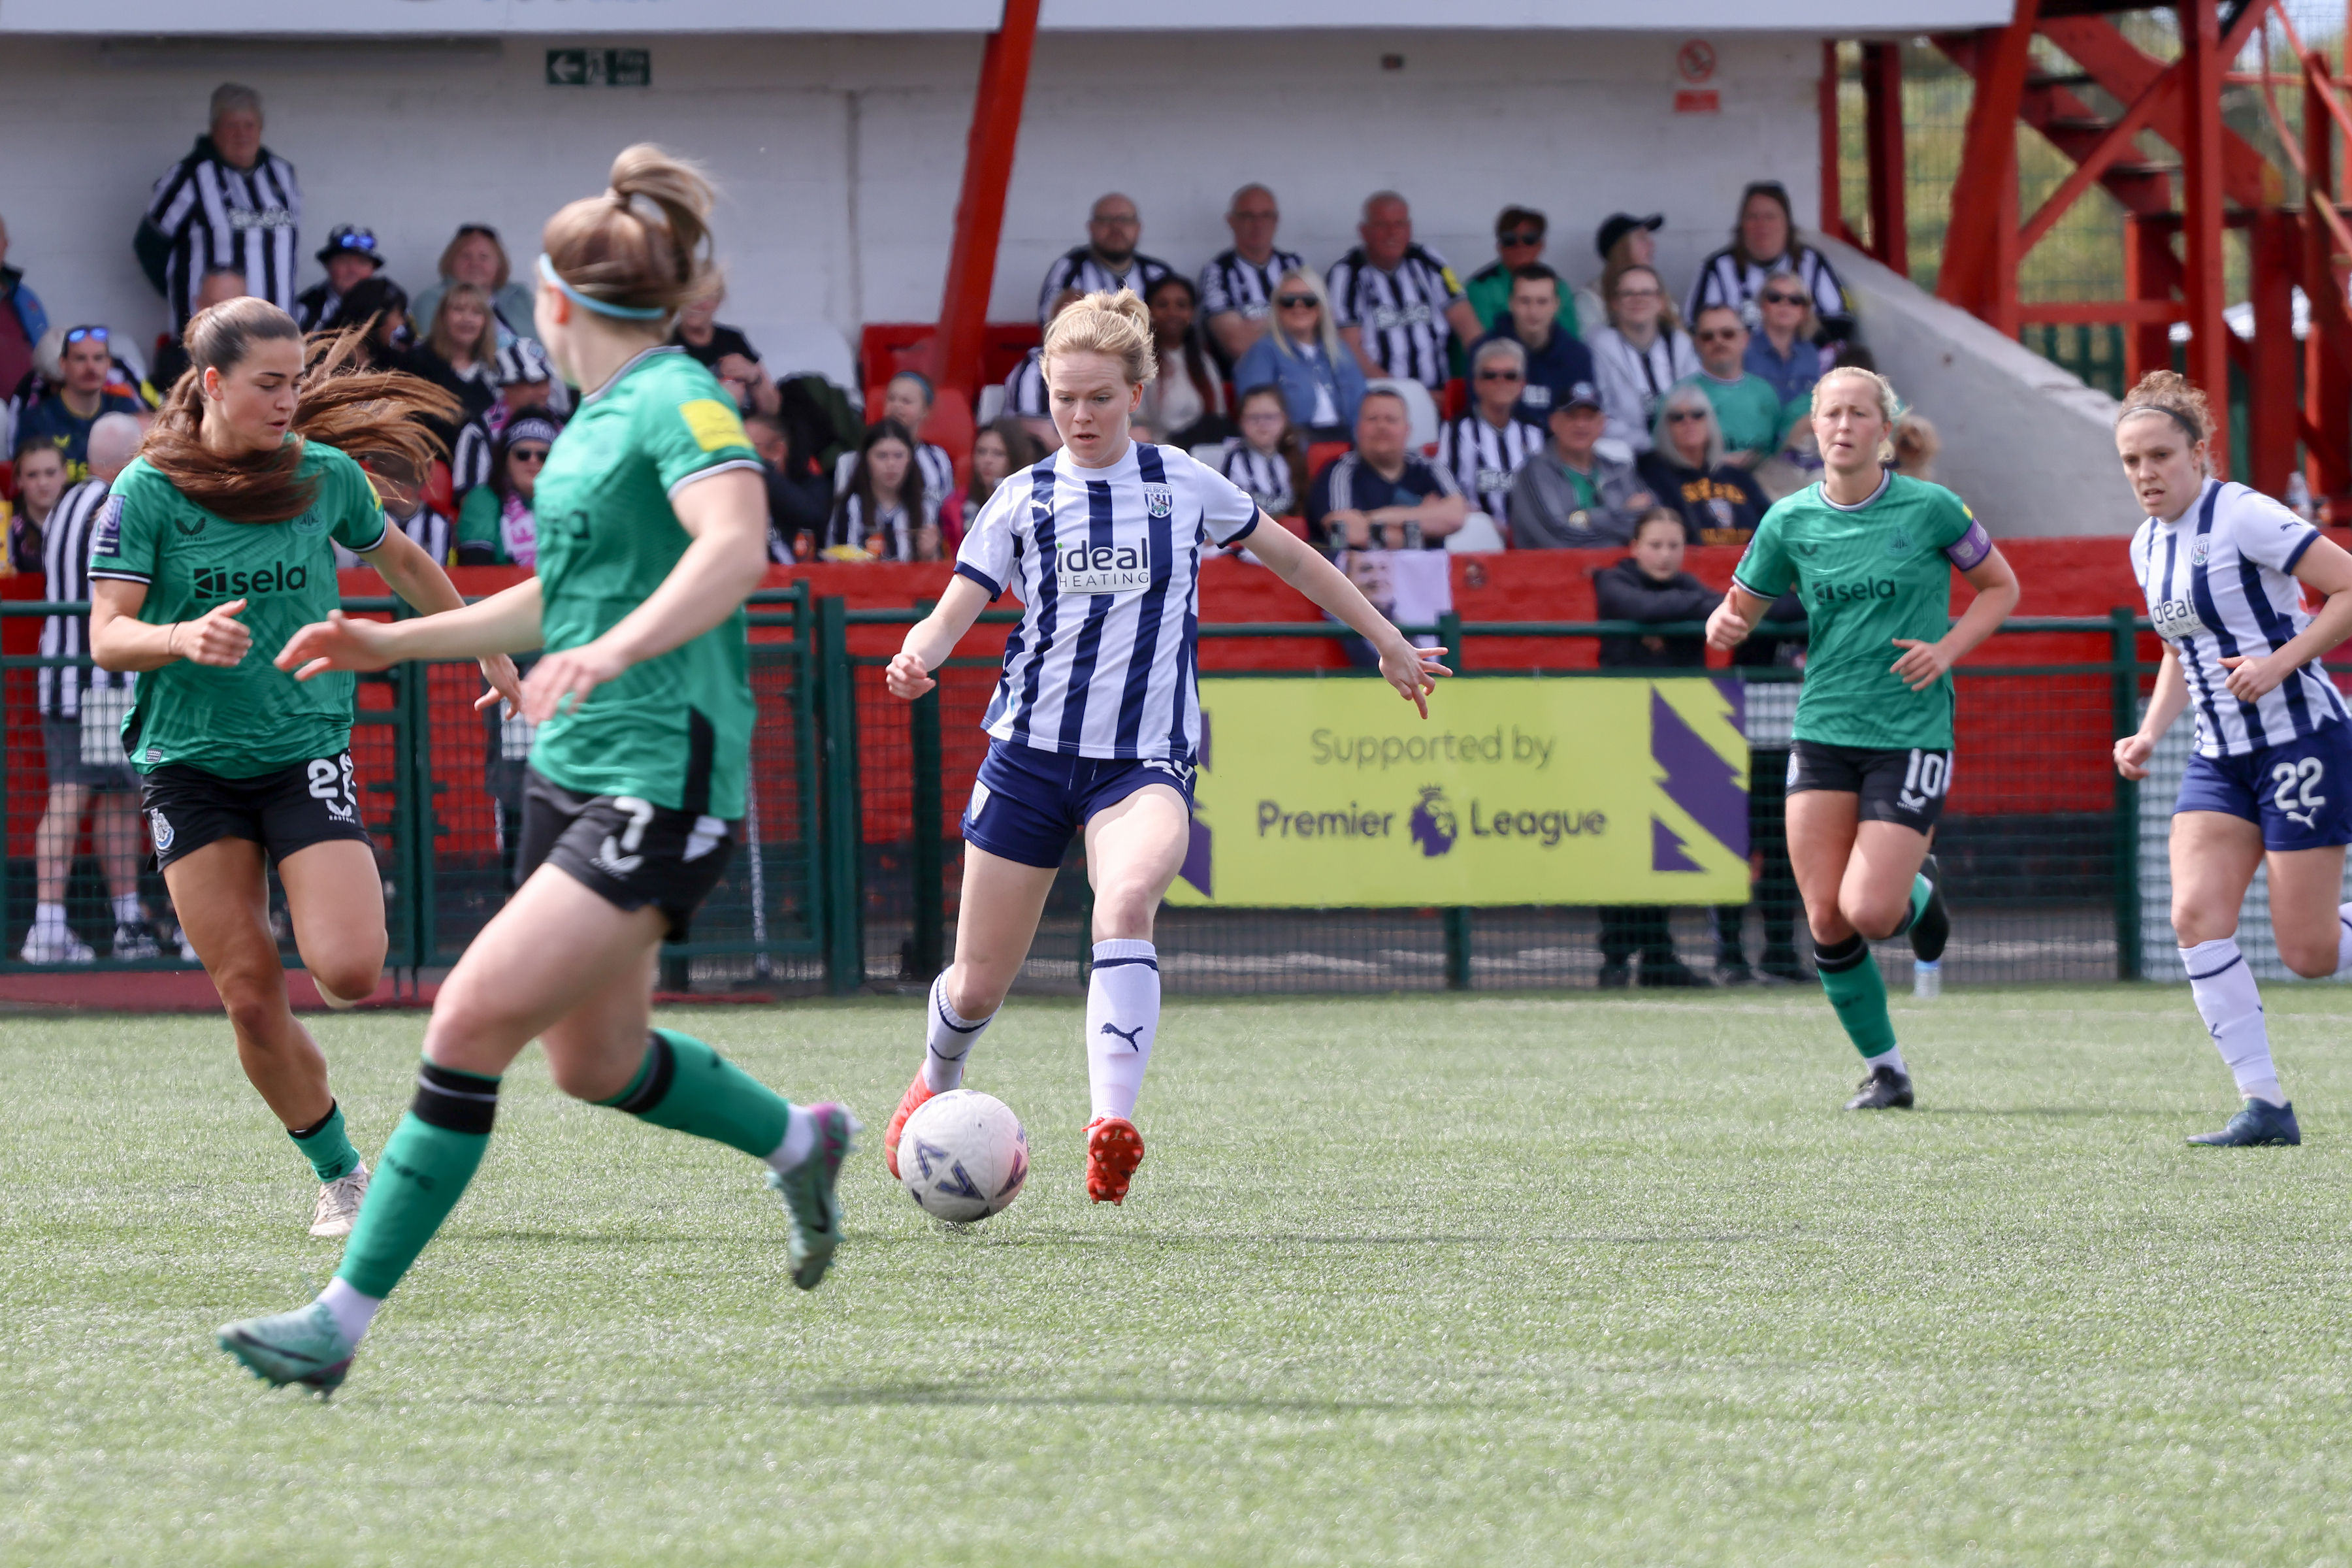 Pheobe Warner in action for Albion Women against Newcastle United wearing the home kit